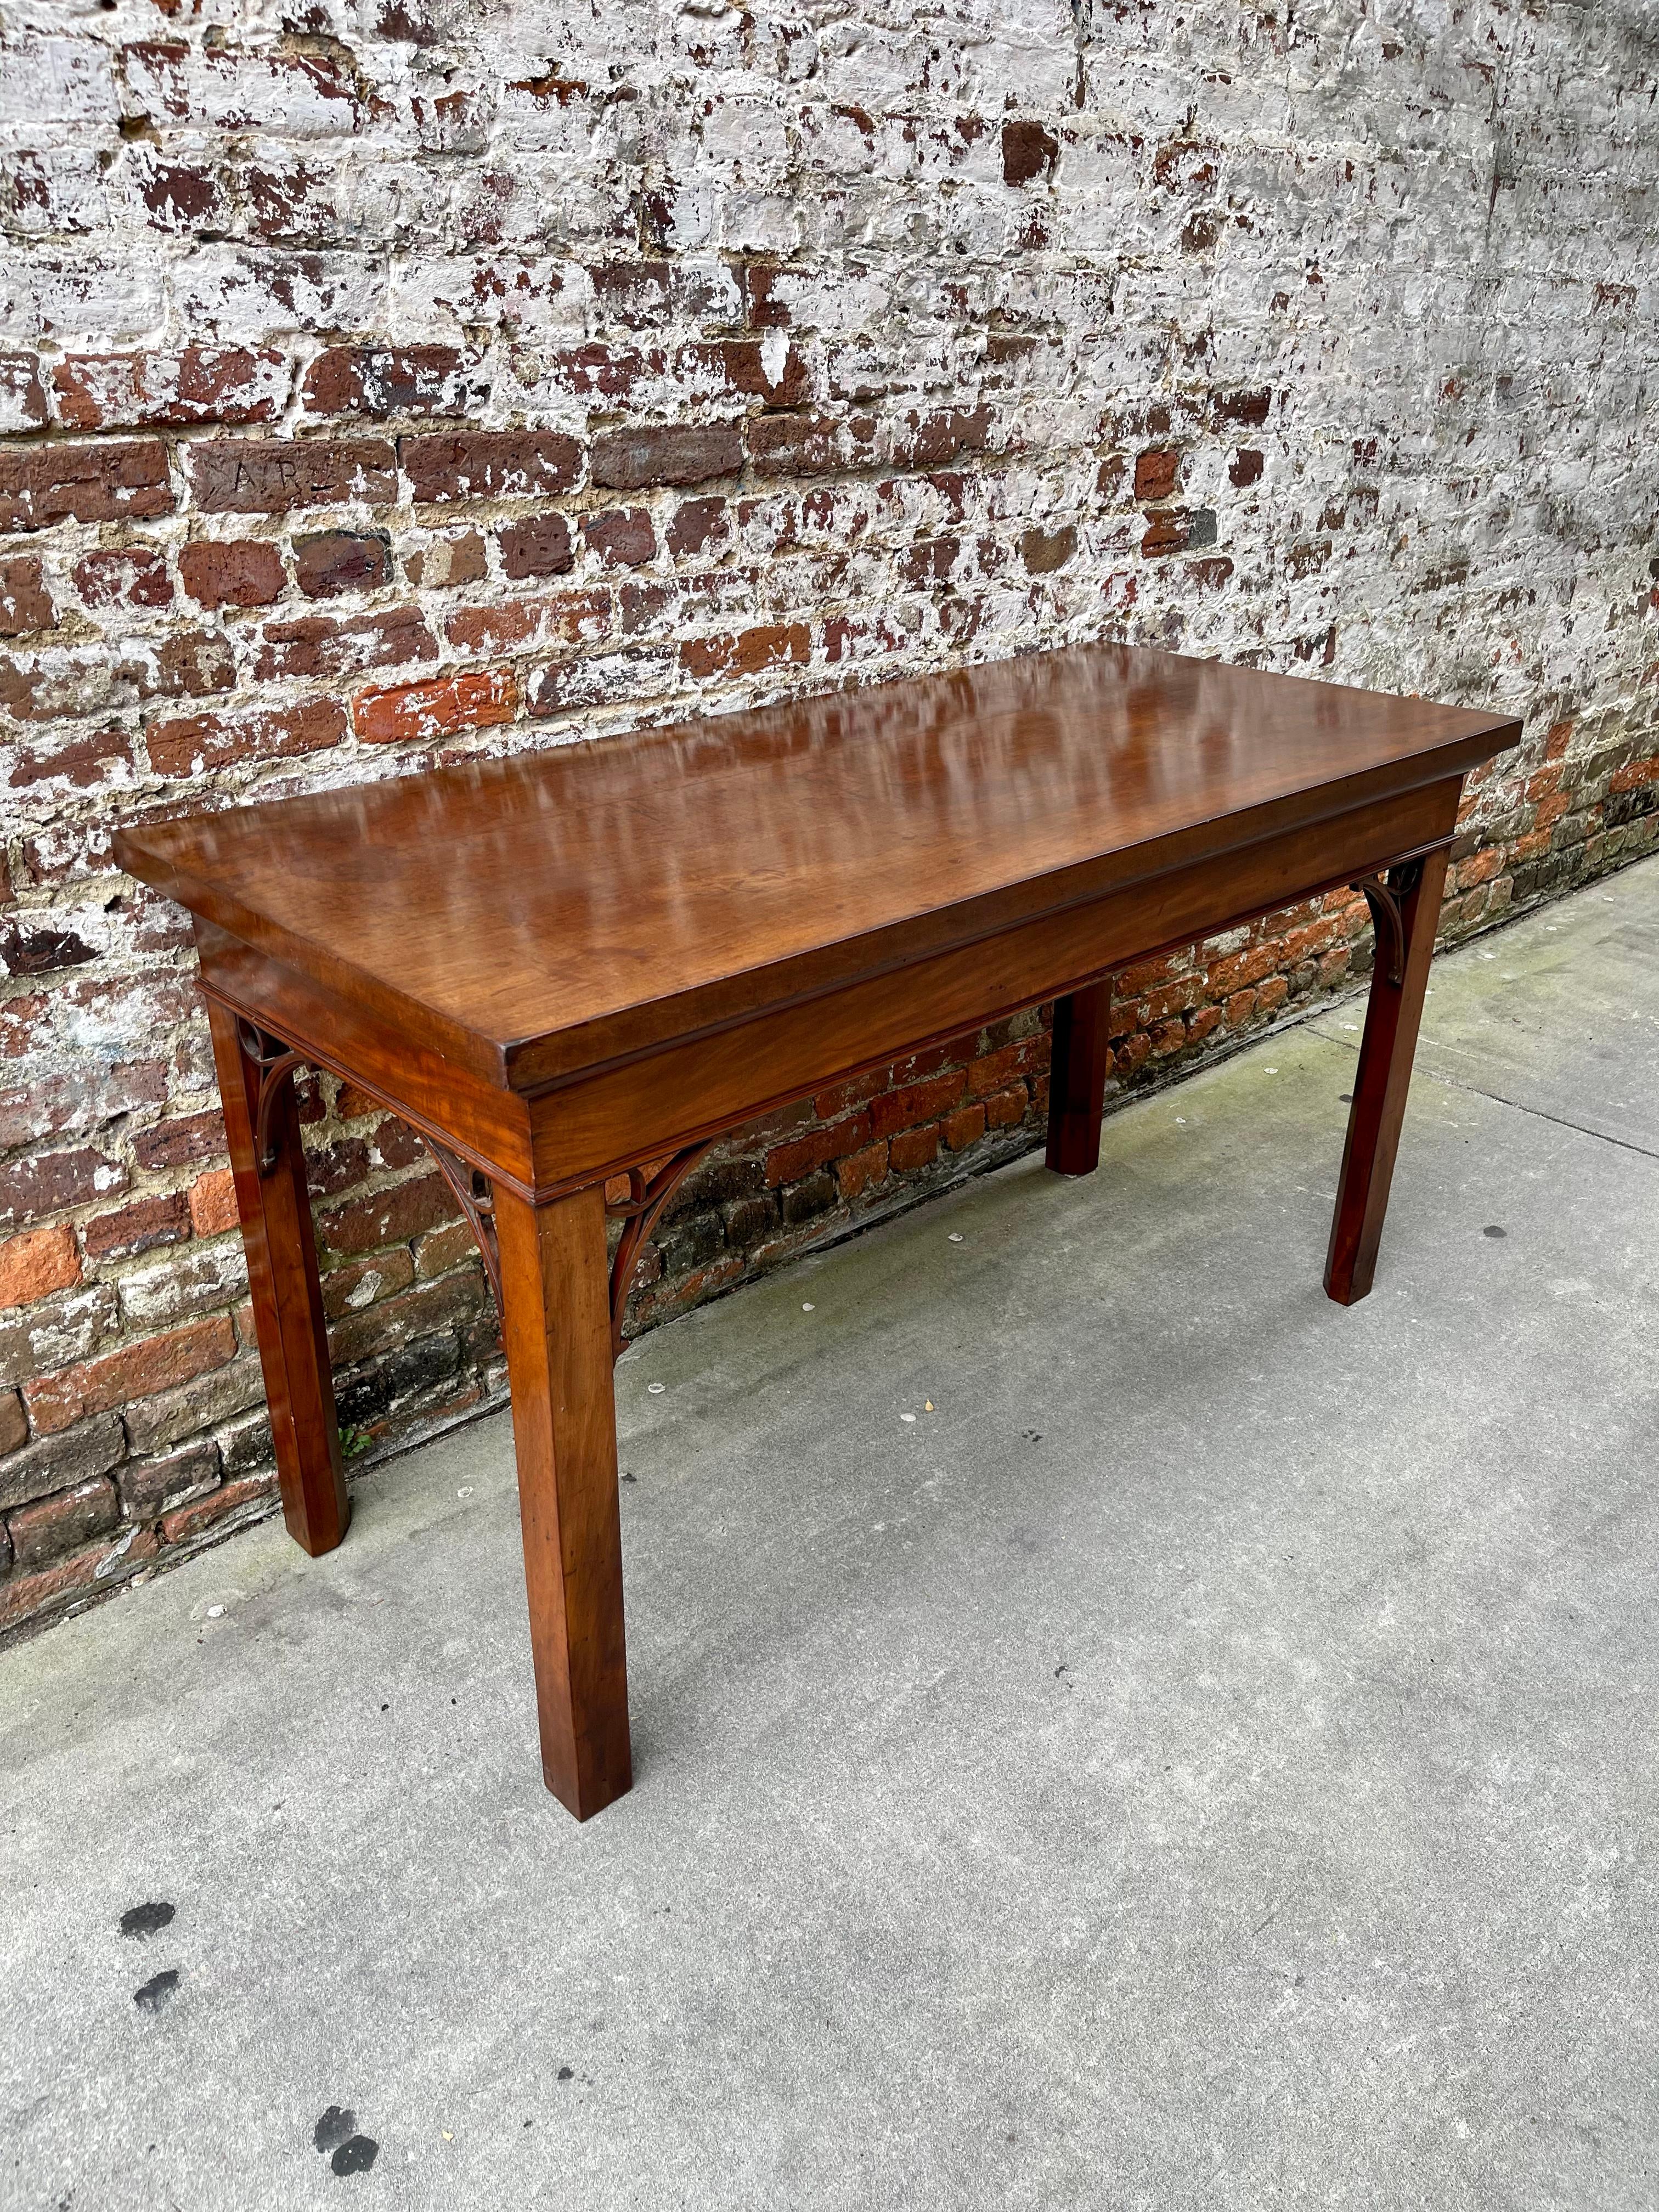 English chippendale server / hall table mahogany late 18th century.